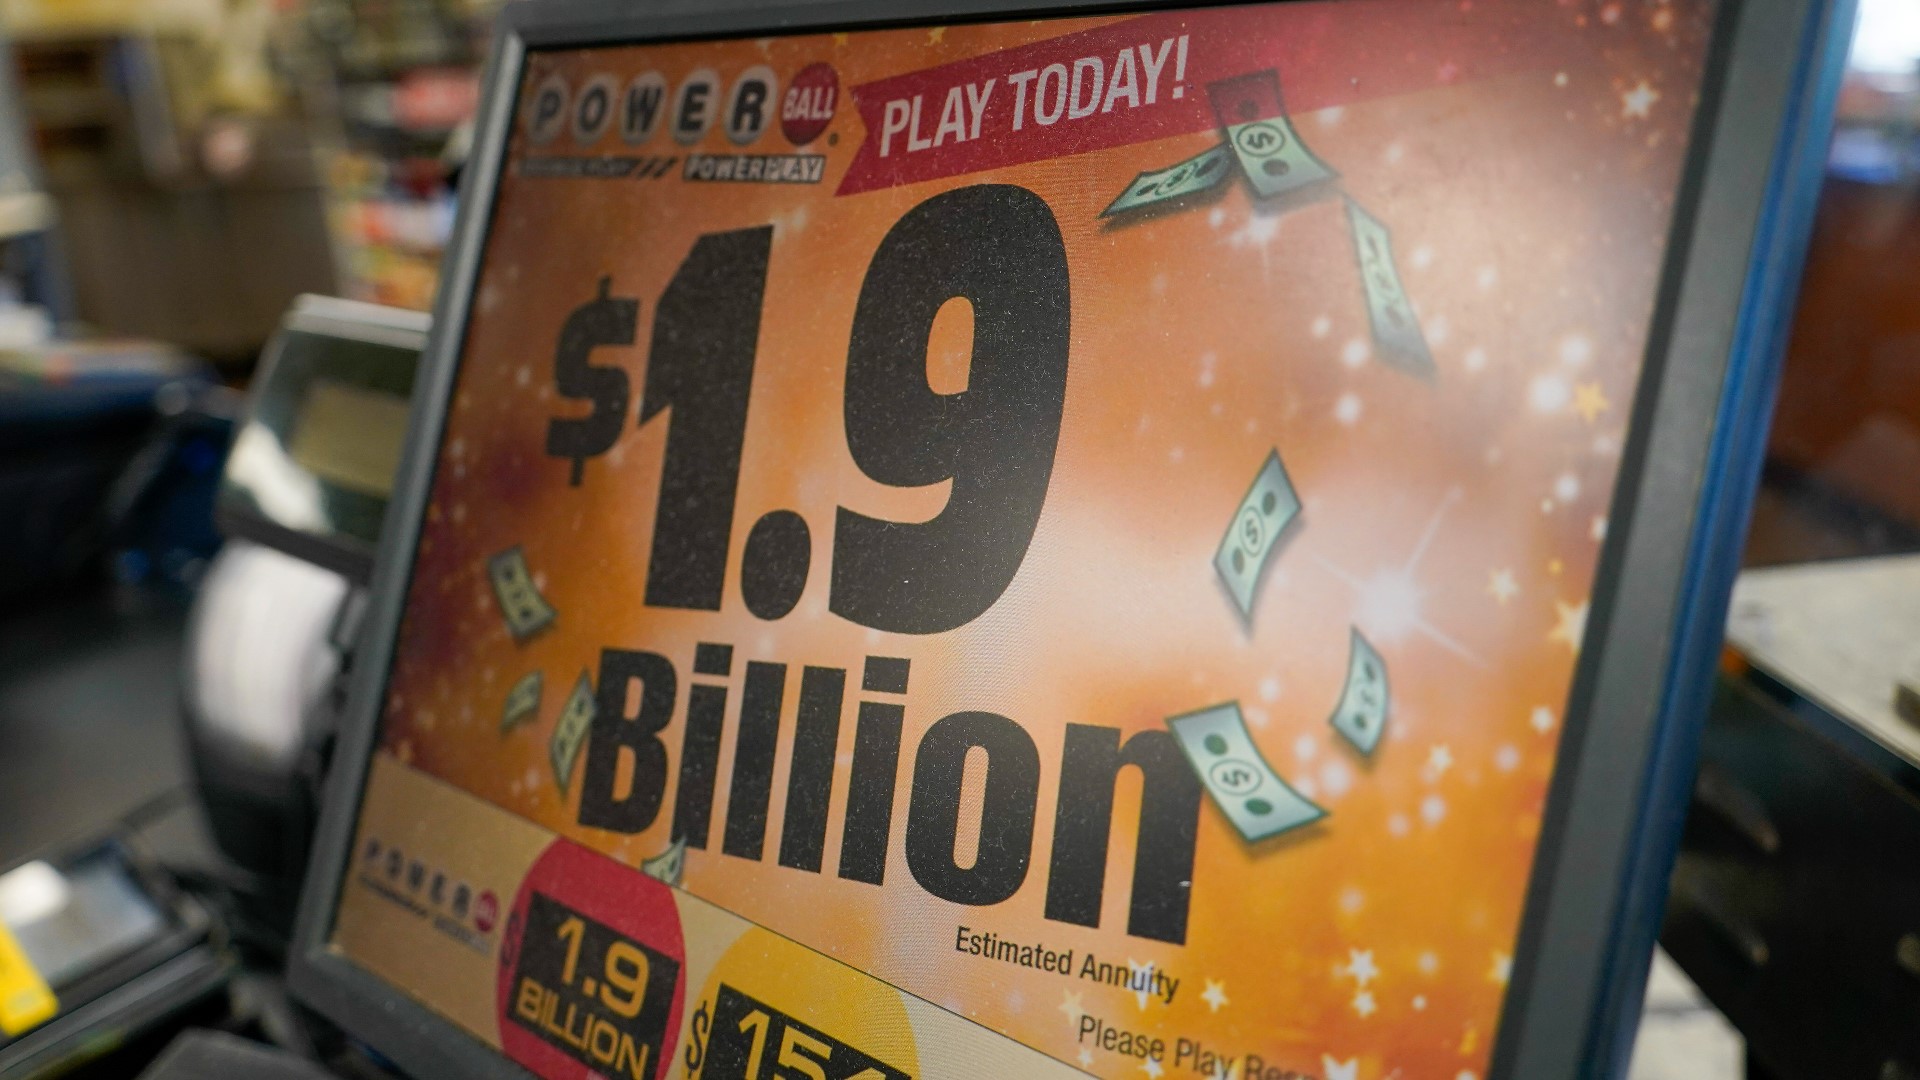 Monday's jackpot soared to a record-setting $1.9 billion. There have only been four previous jackpots exceeding $1 billion.